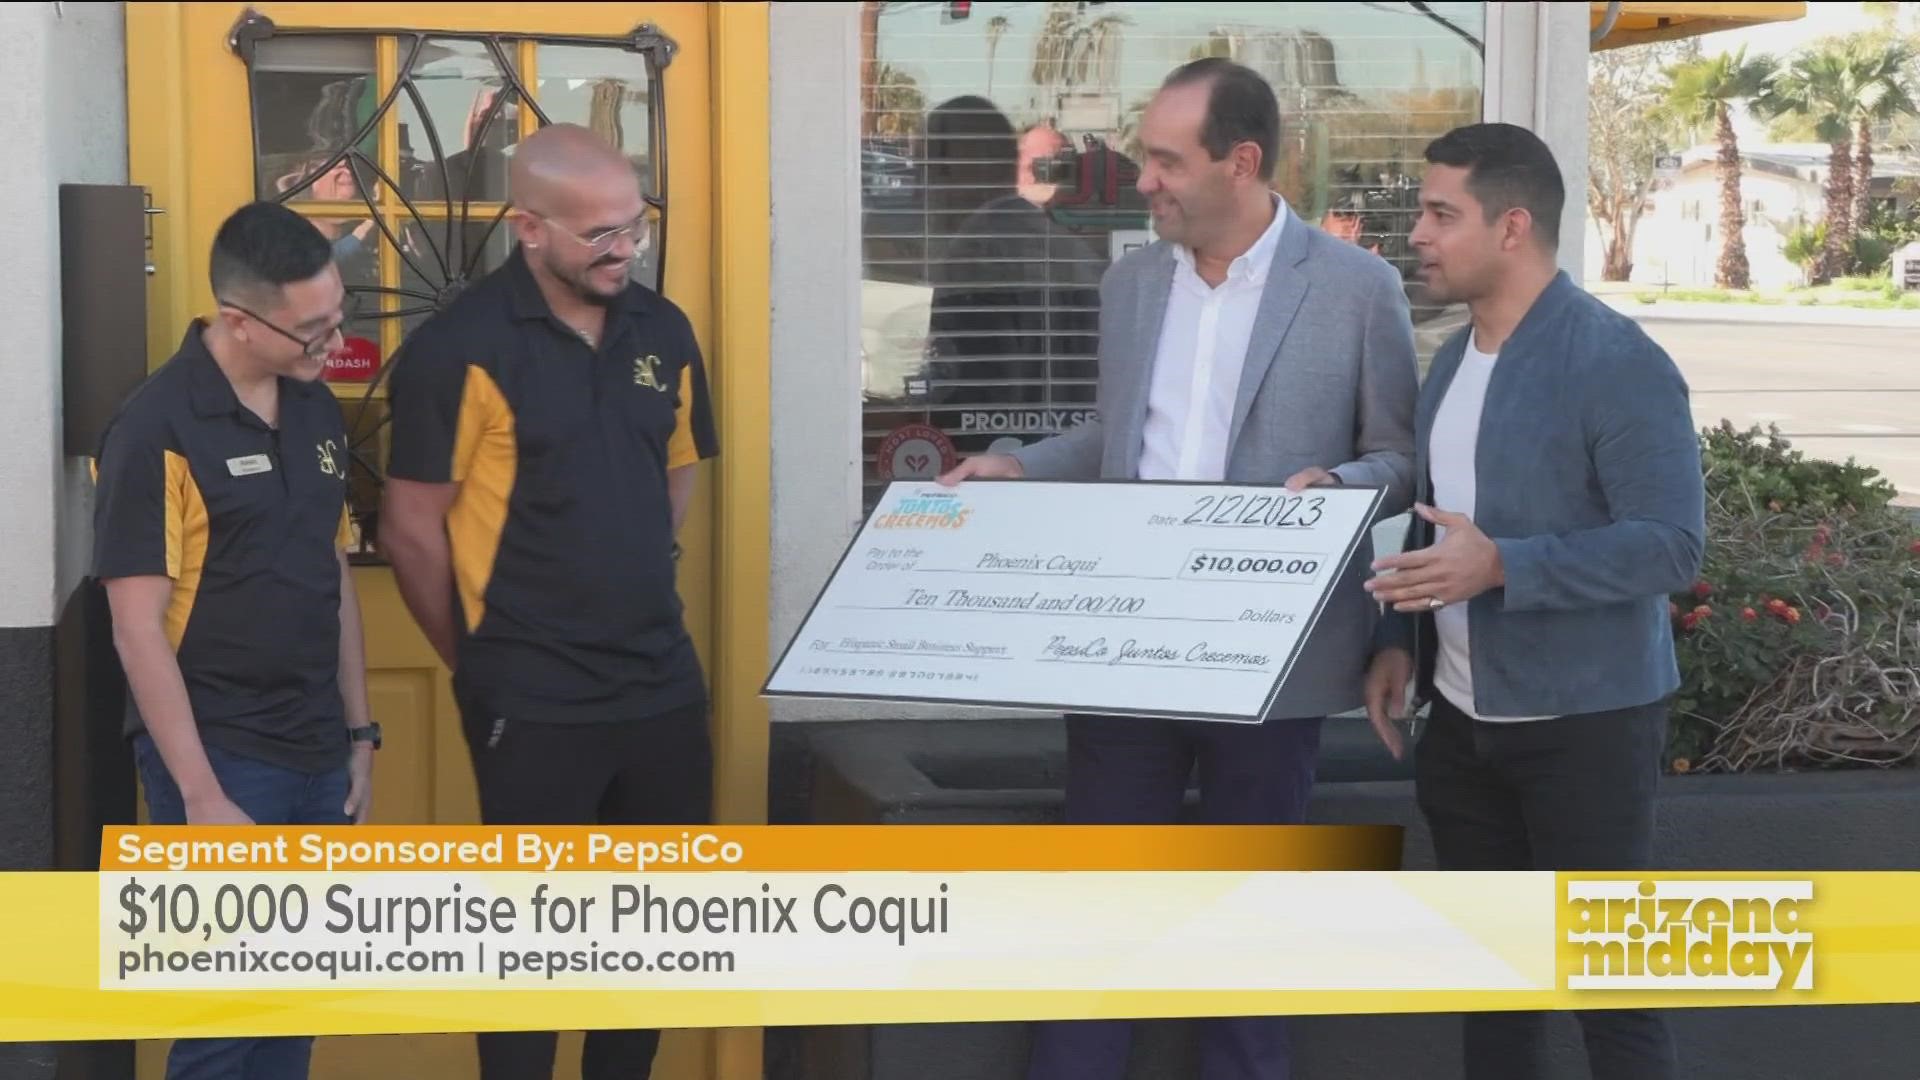 Actor Wilmer Valderrama surprised 5 Hispanic-owned businesses, including Phoenix Coqui, with a check for $10,000 as part of PepsiCo’s Juntos Crecemos.